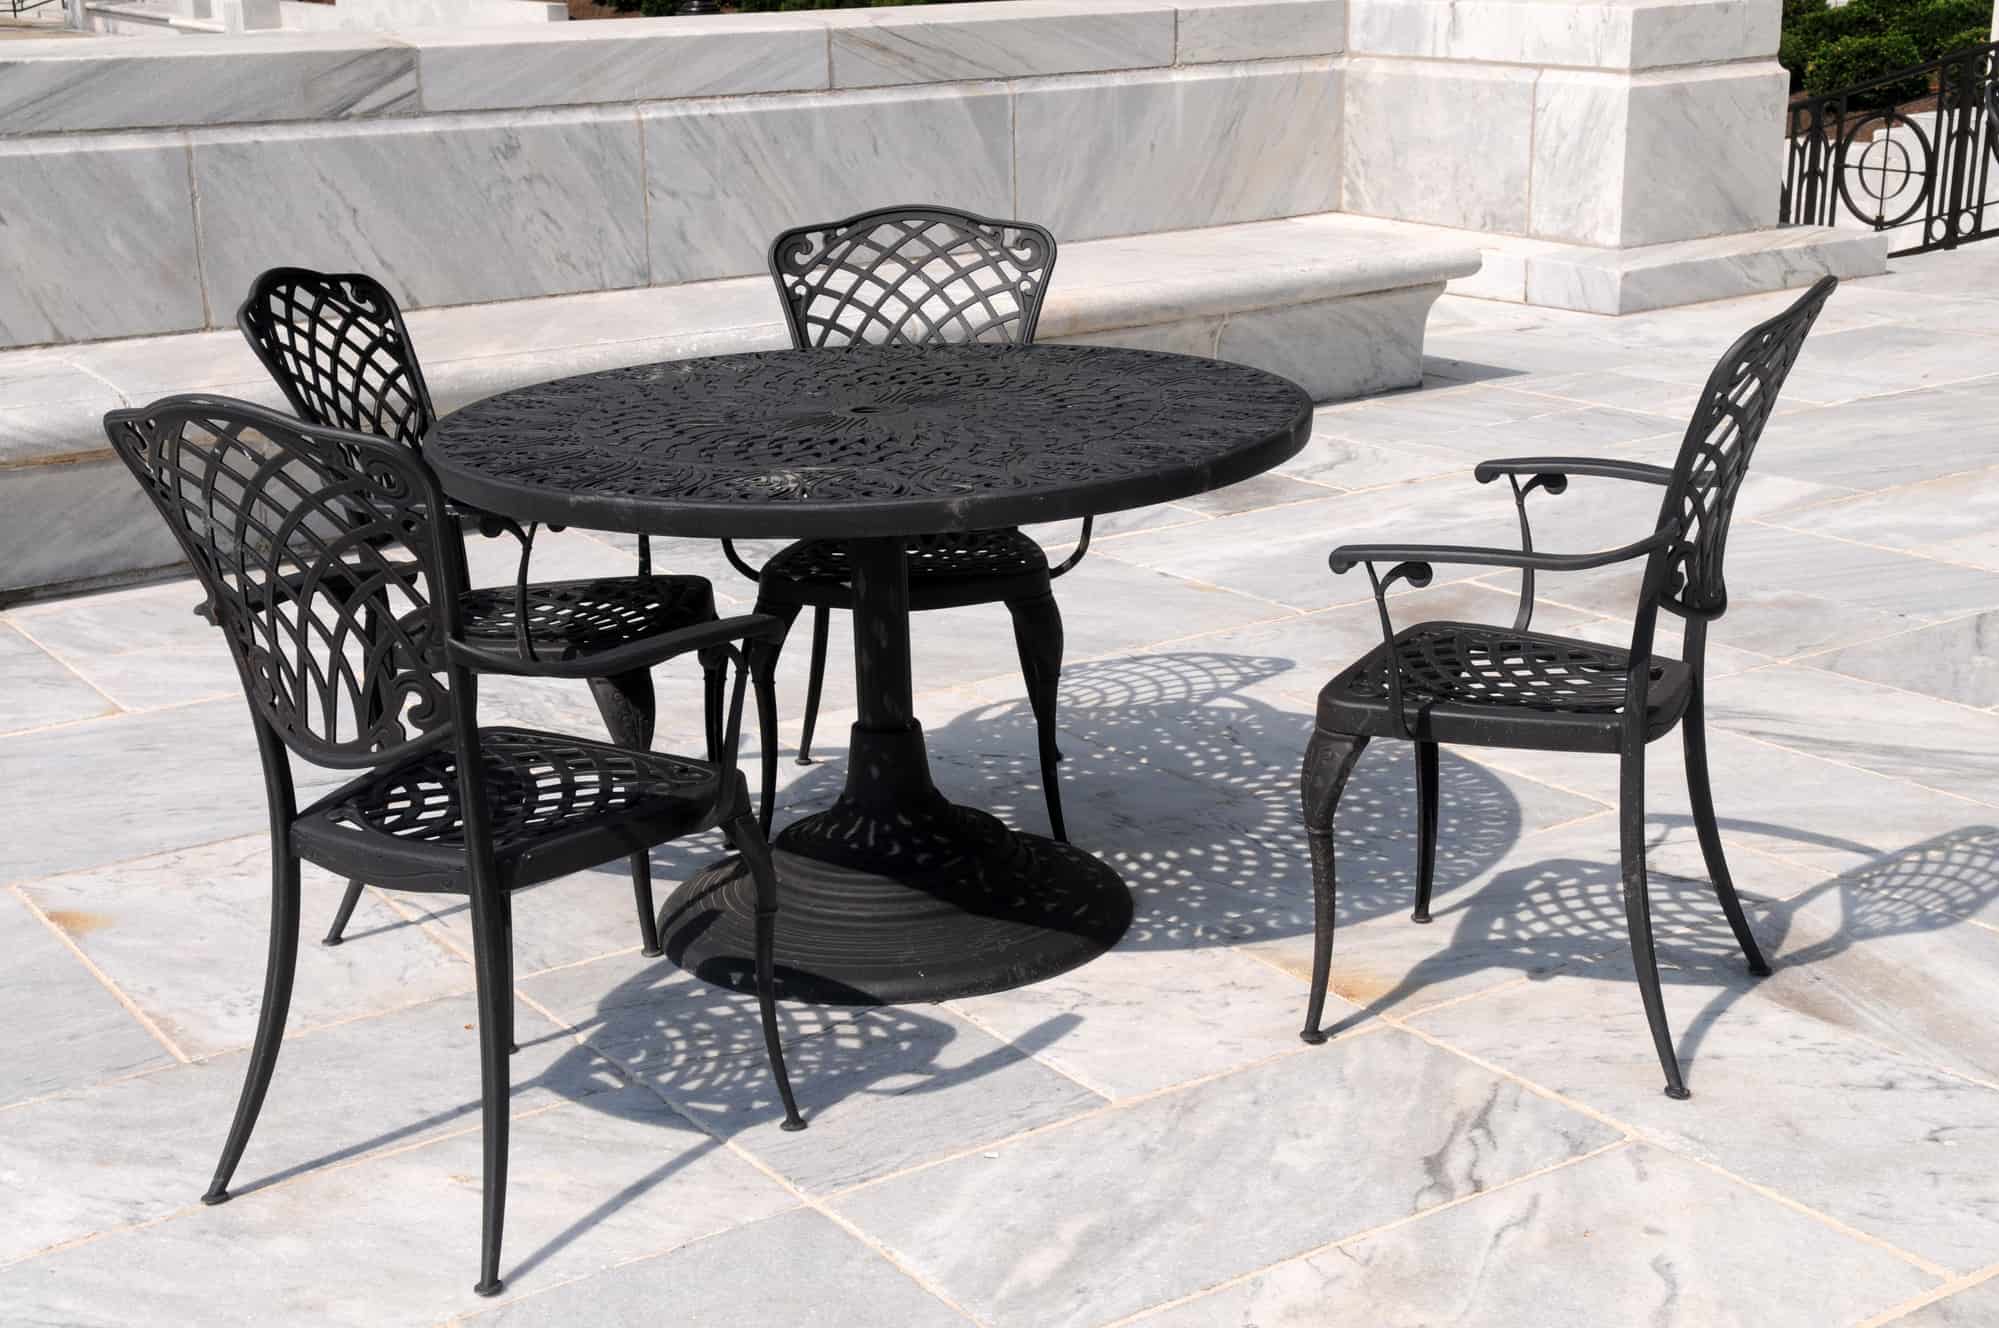 Wrought Iron Patio Furniture, How To Fix Cast Iron Patio Furniture